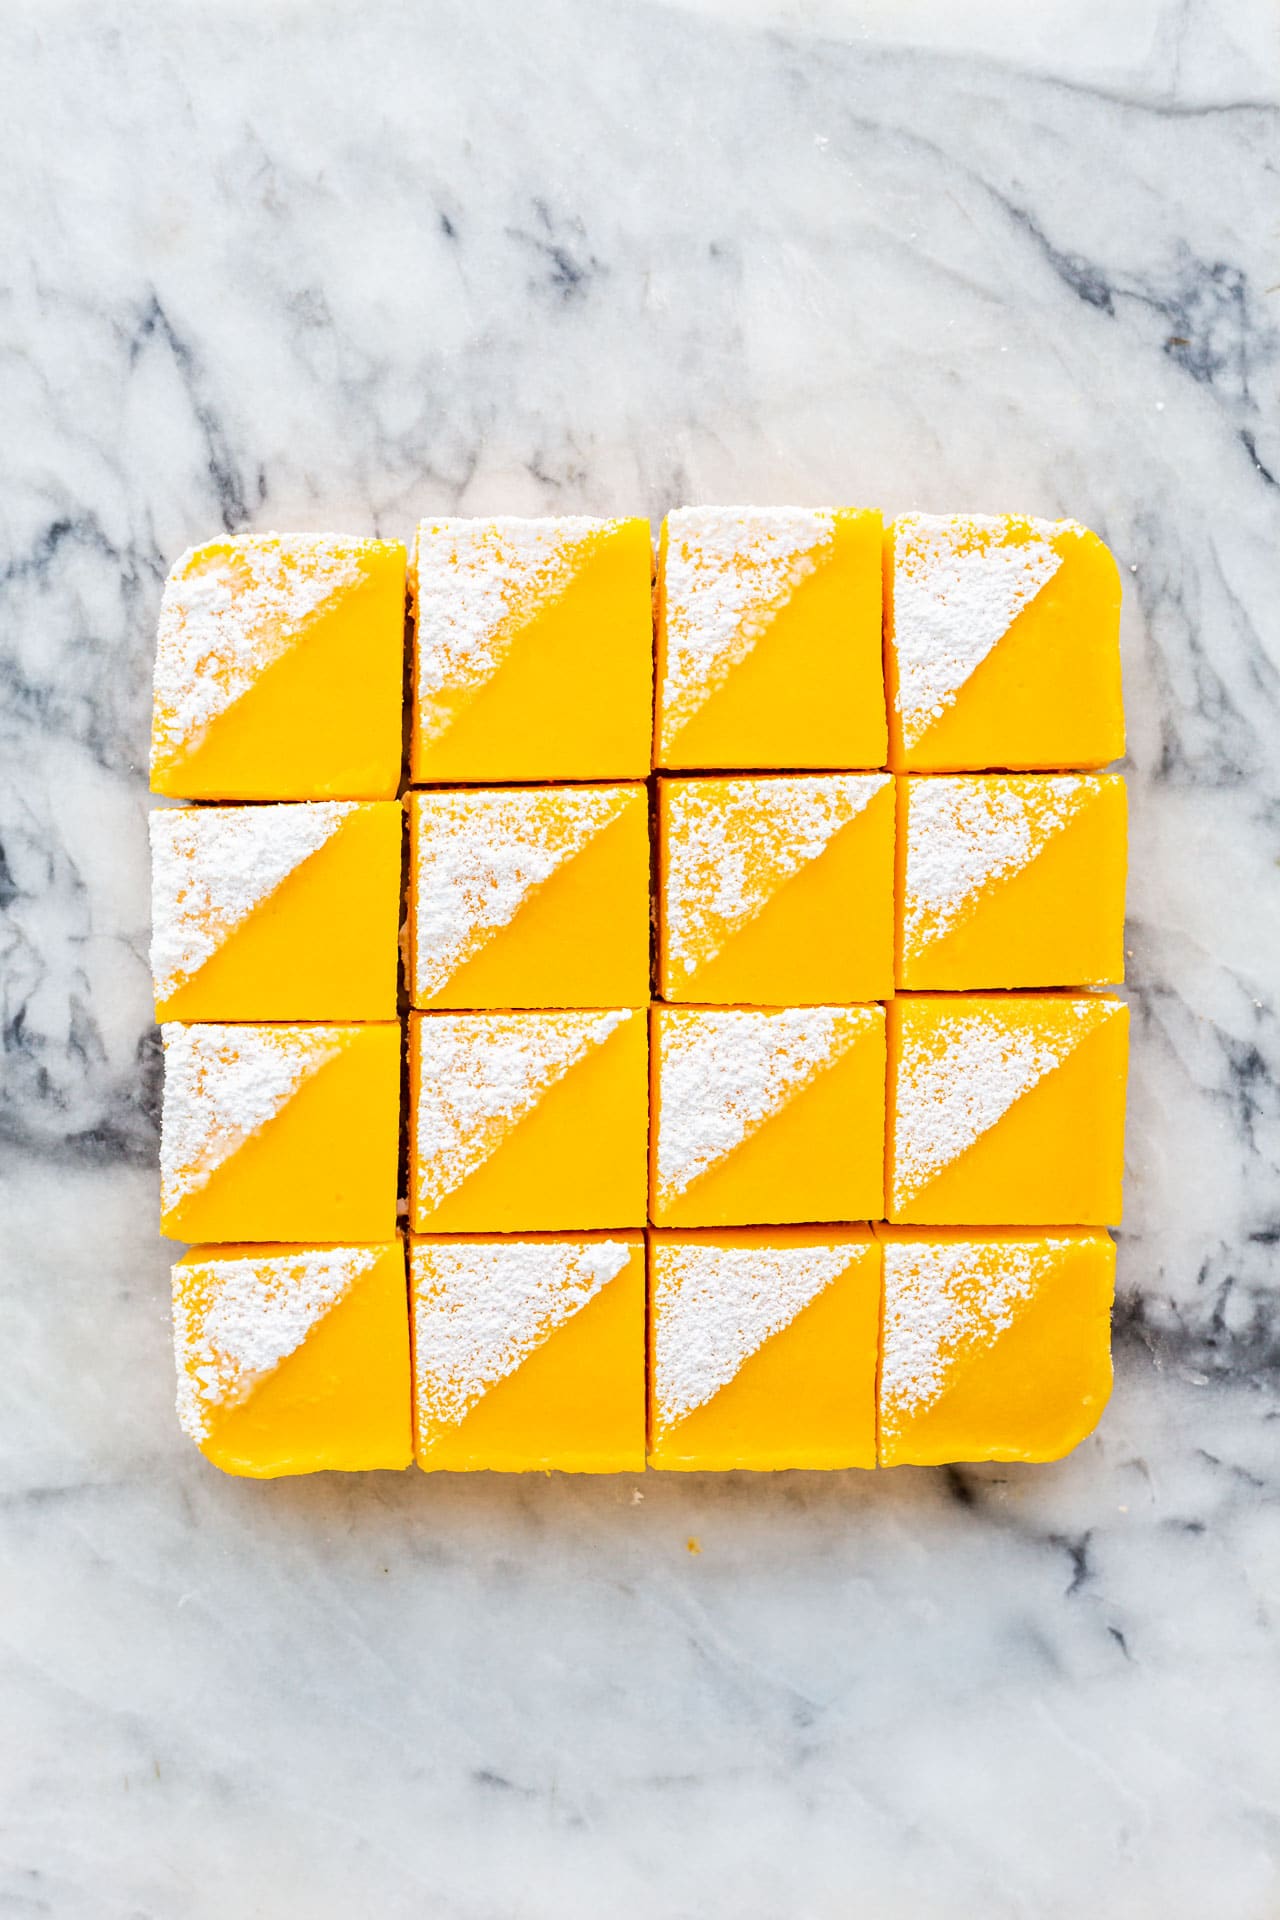 Lemon bars cut into squares and decorated with icing sugar on a marble surface.